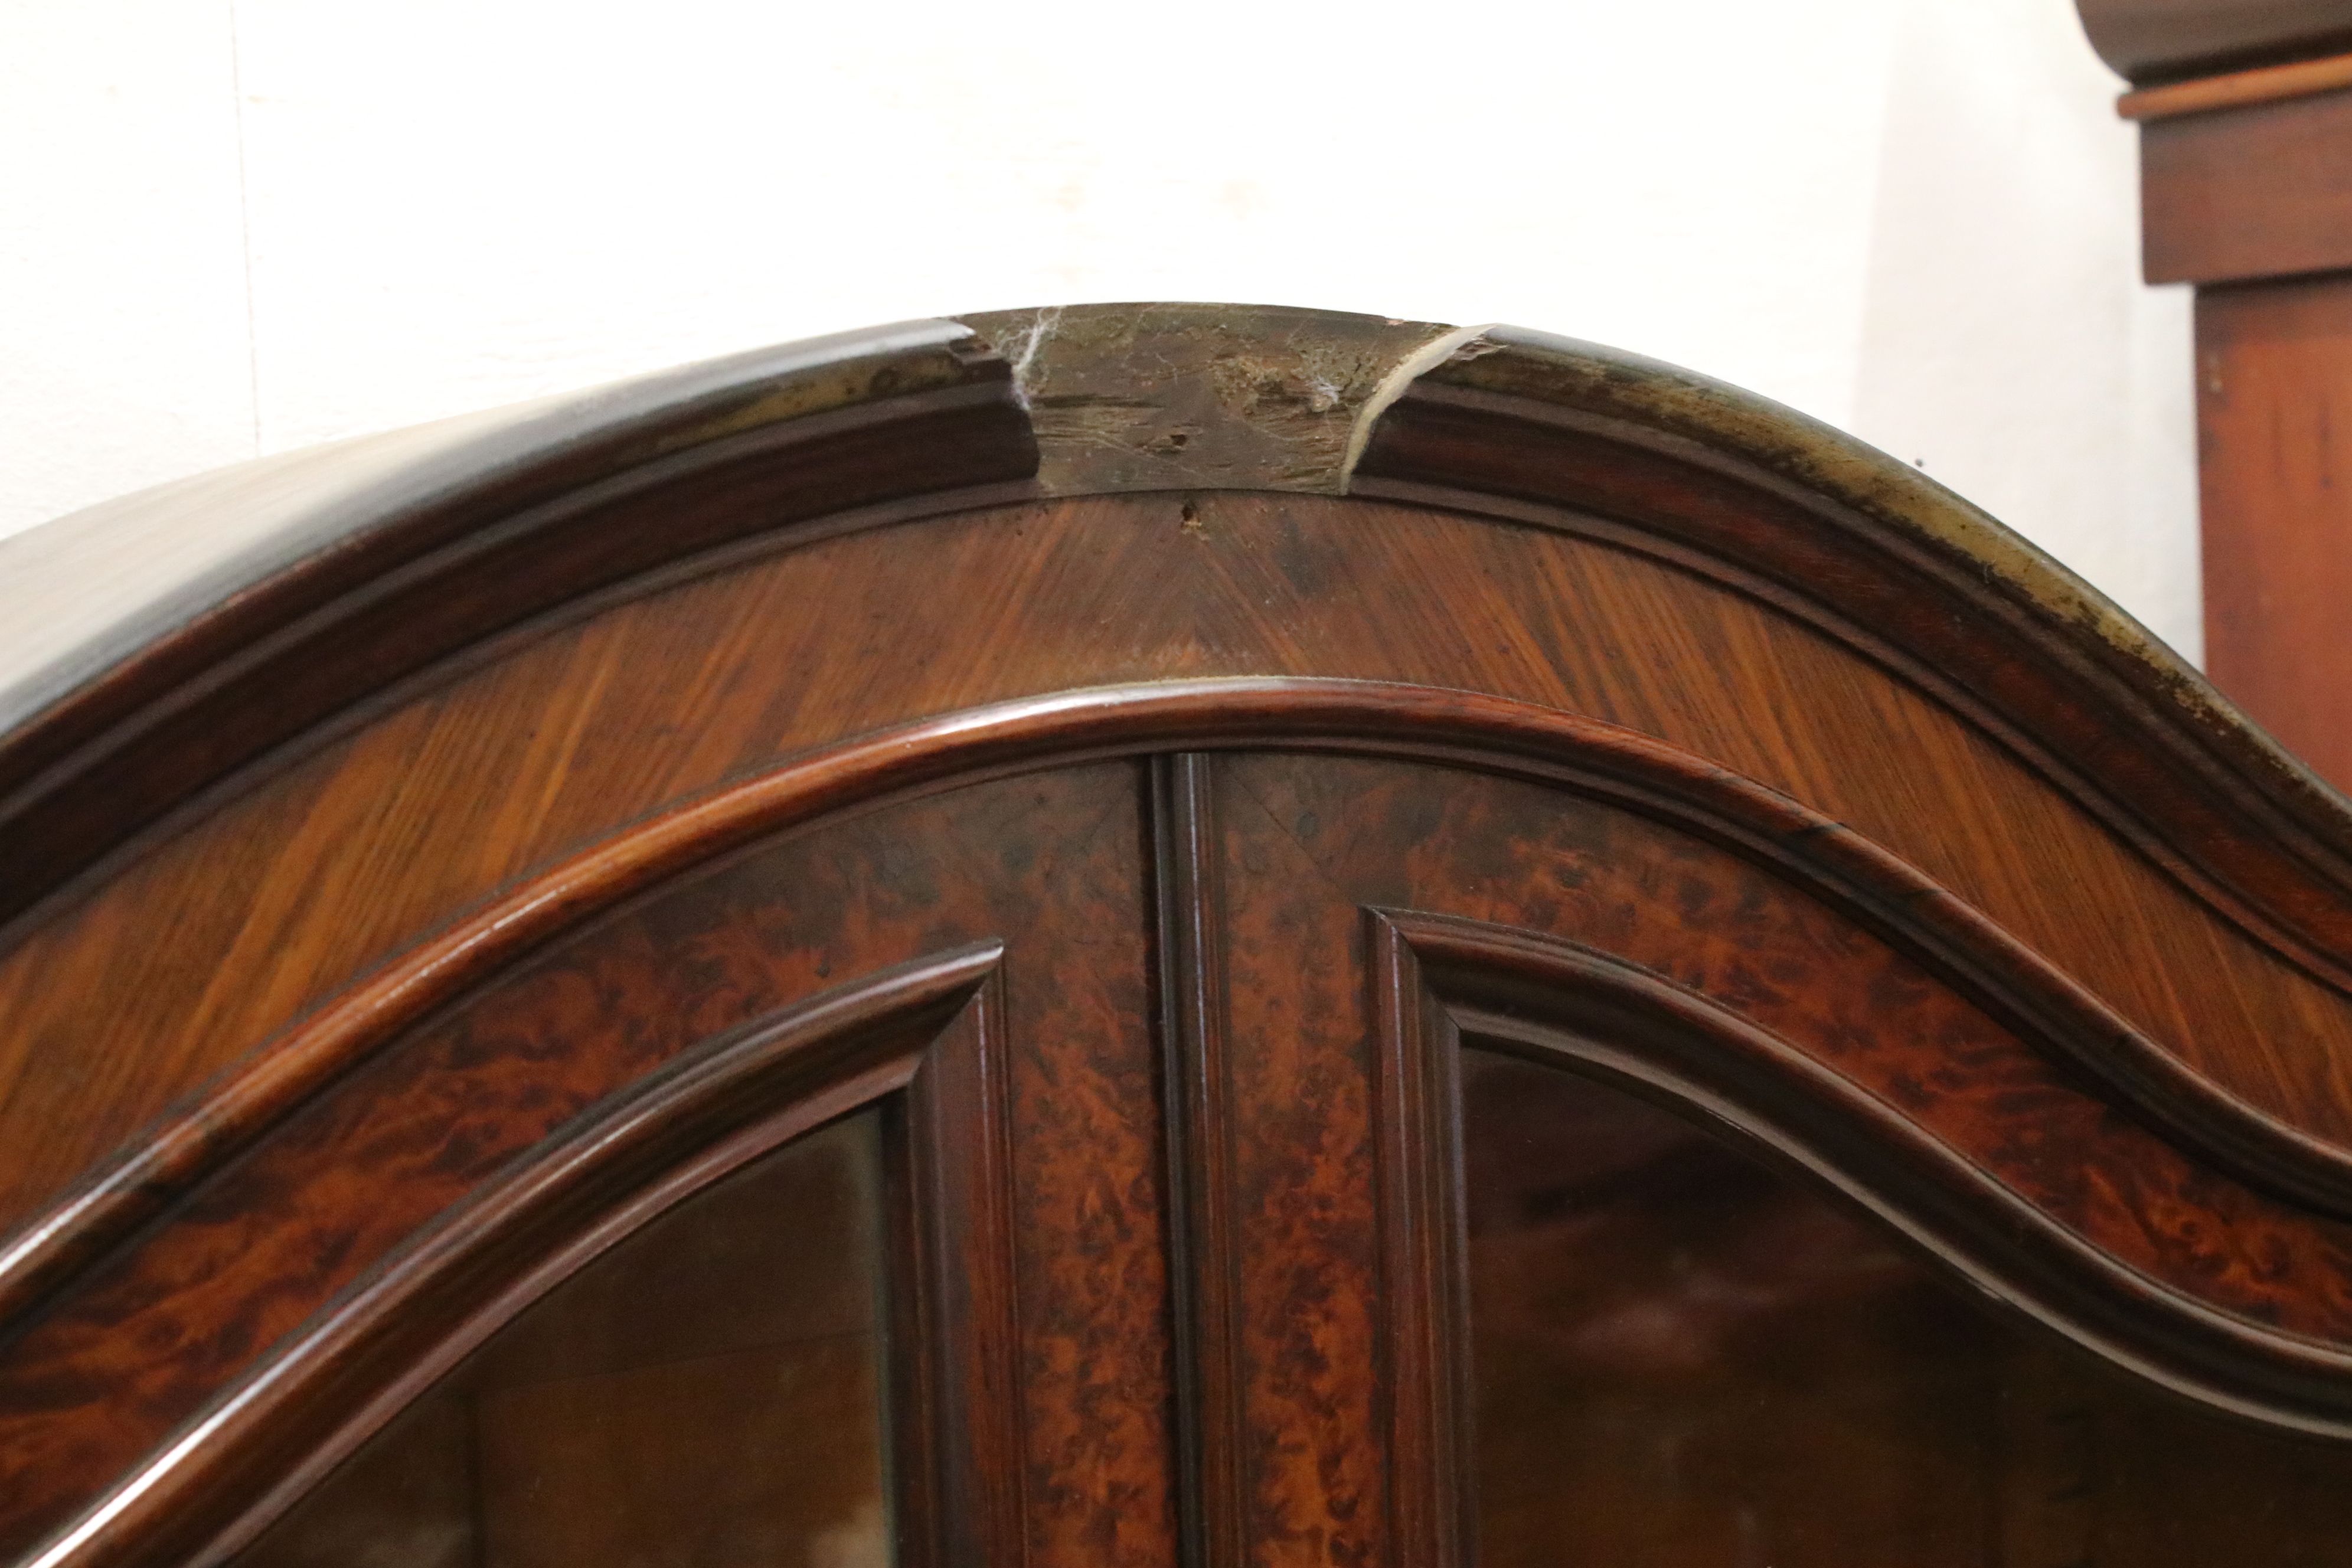 19th century style French Burr Wood Bureau Bookcase, the upper section with two glazed doors opening - Image 8 of 9